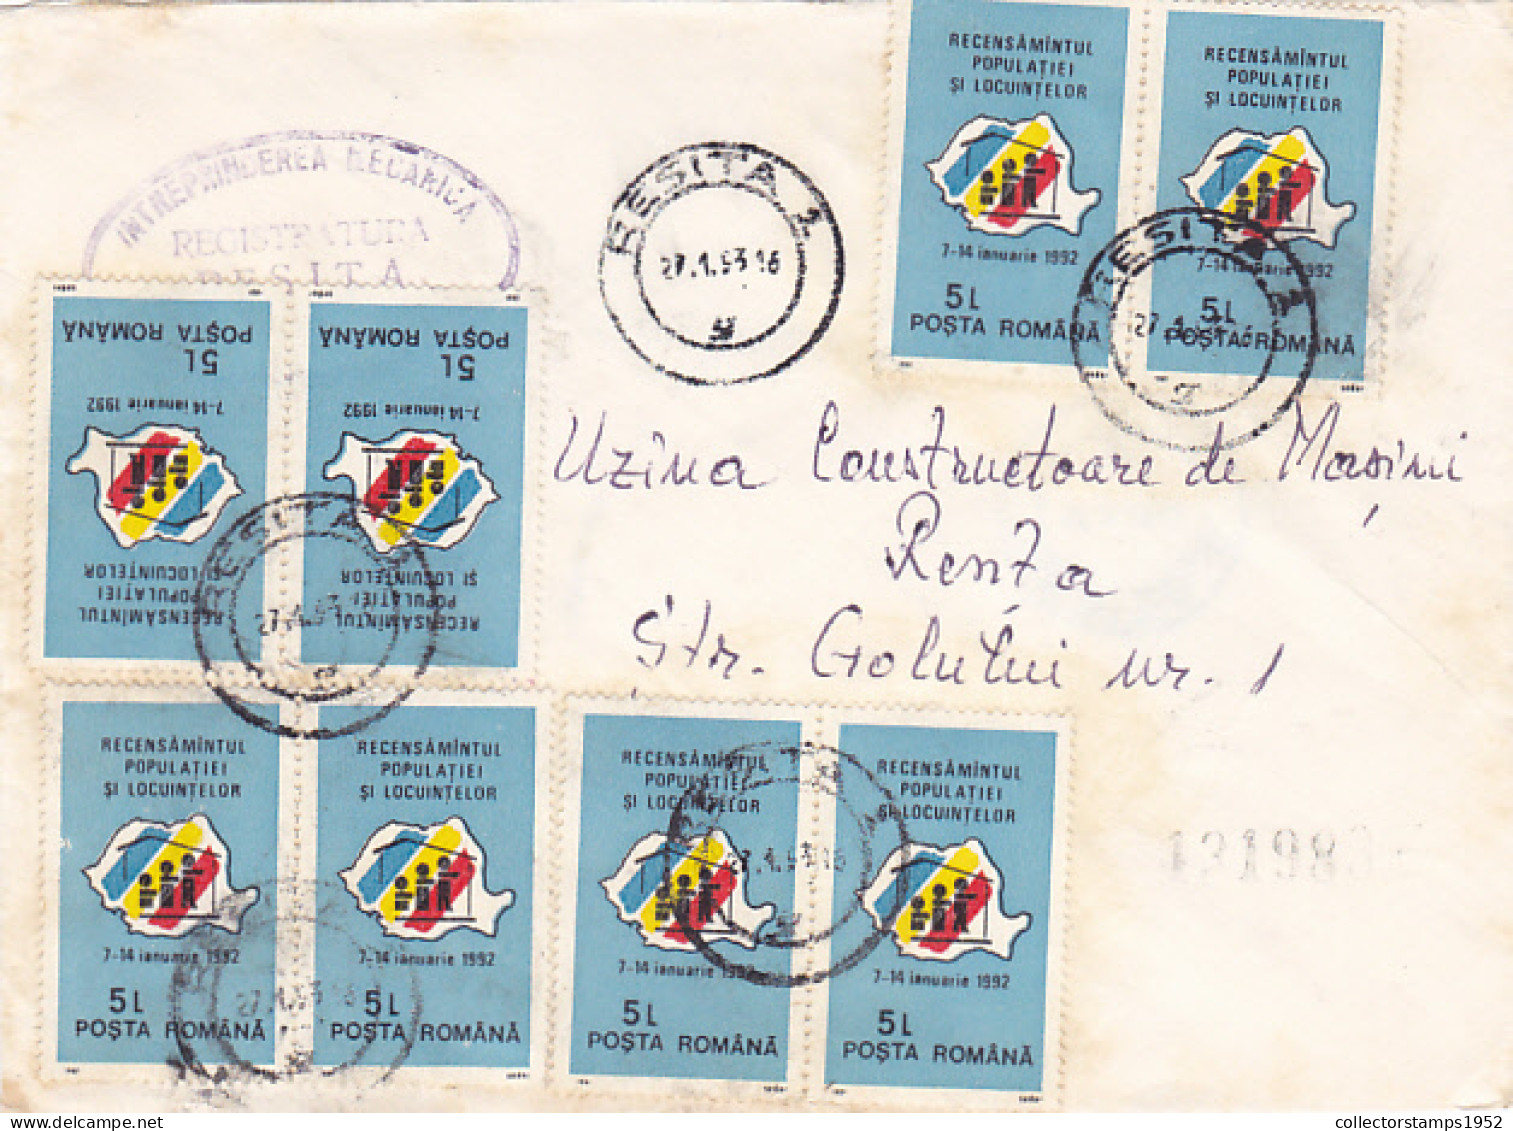 POPULATION CENSUS STAMPS ON COVER, 1993, ROMANIA - Covers & Documents